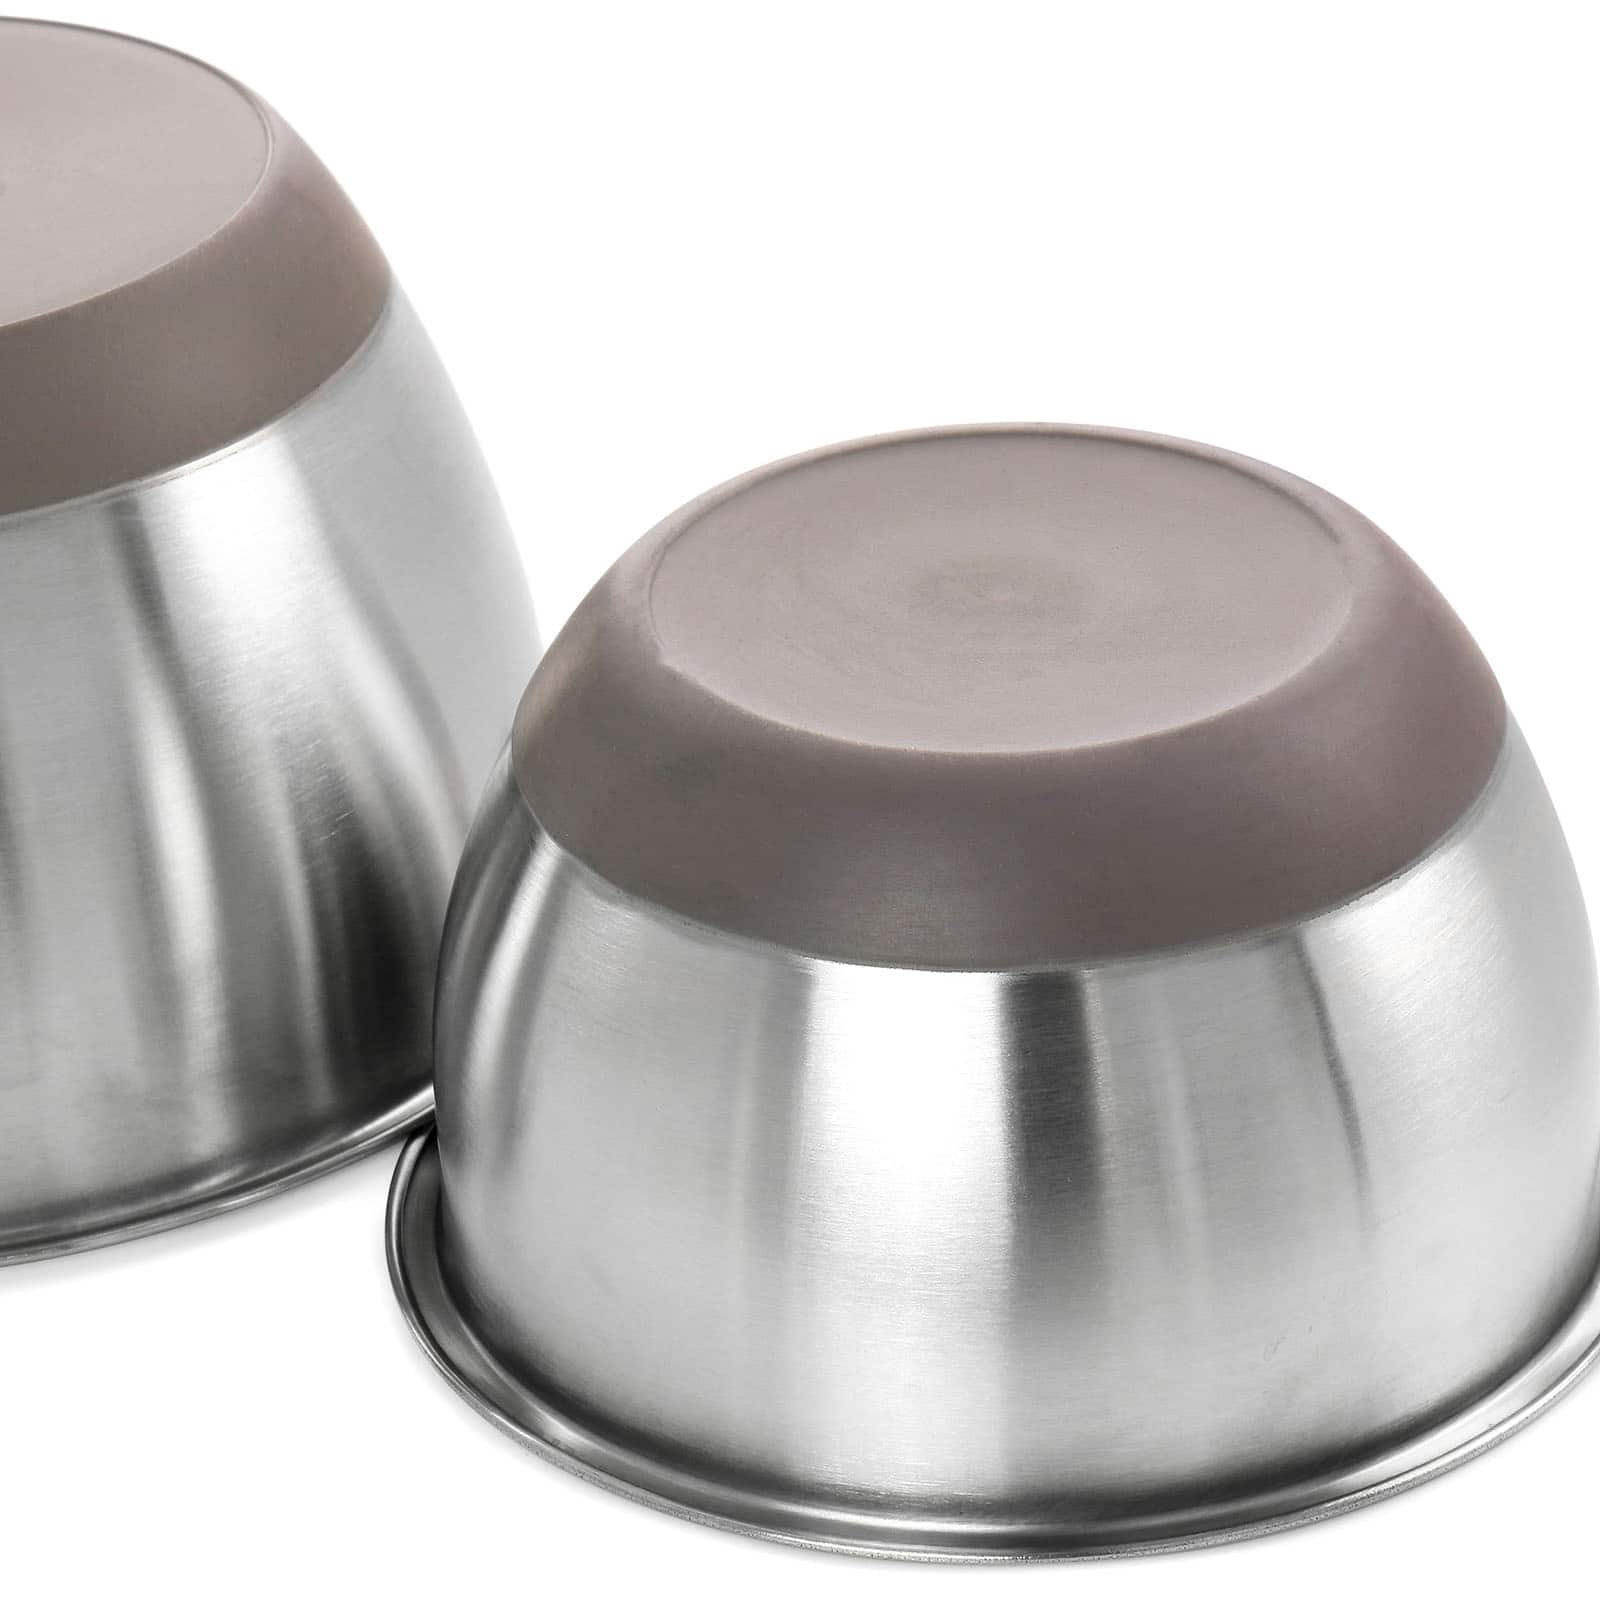 Martha Stewart Collection Covered Stainless Steel Mixing Bowls